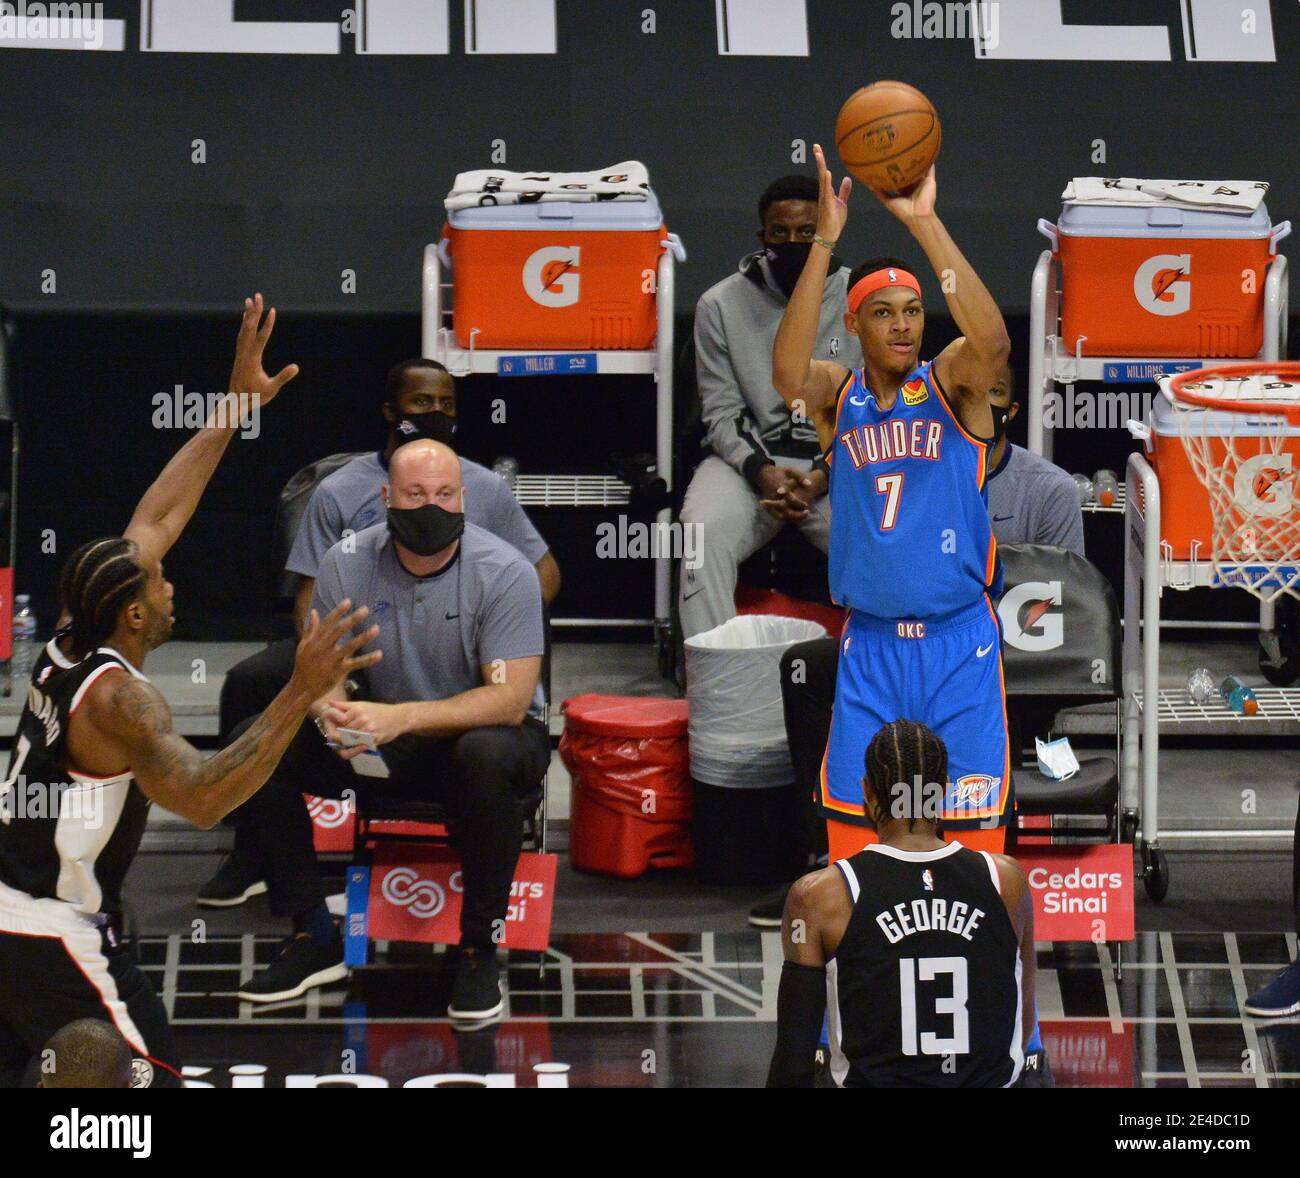 Paul george clippers dunk hi-res stock photography and images - Alamy